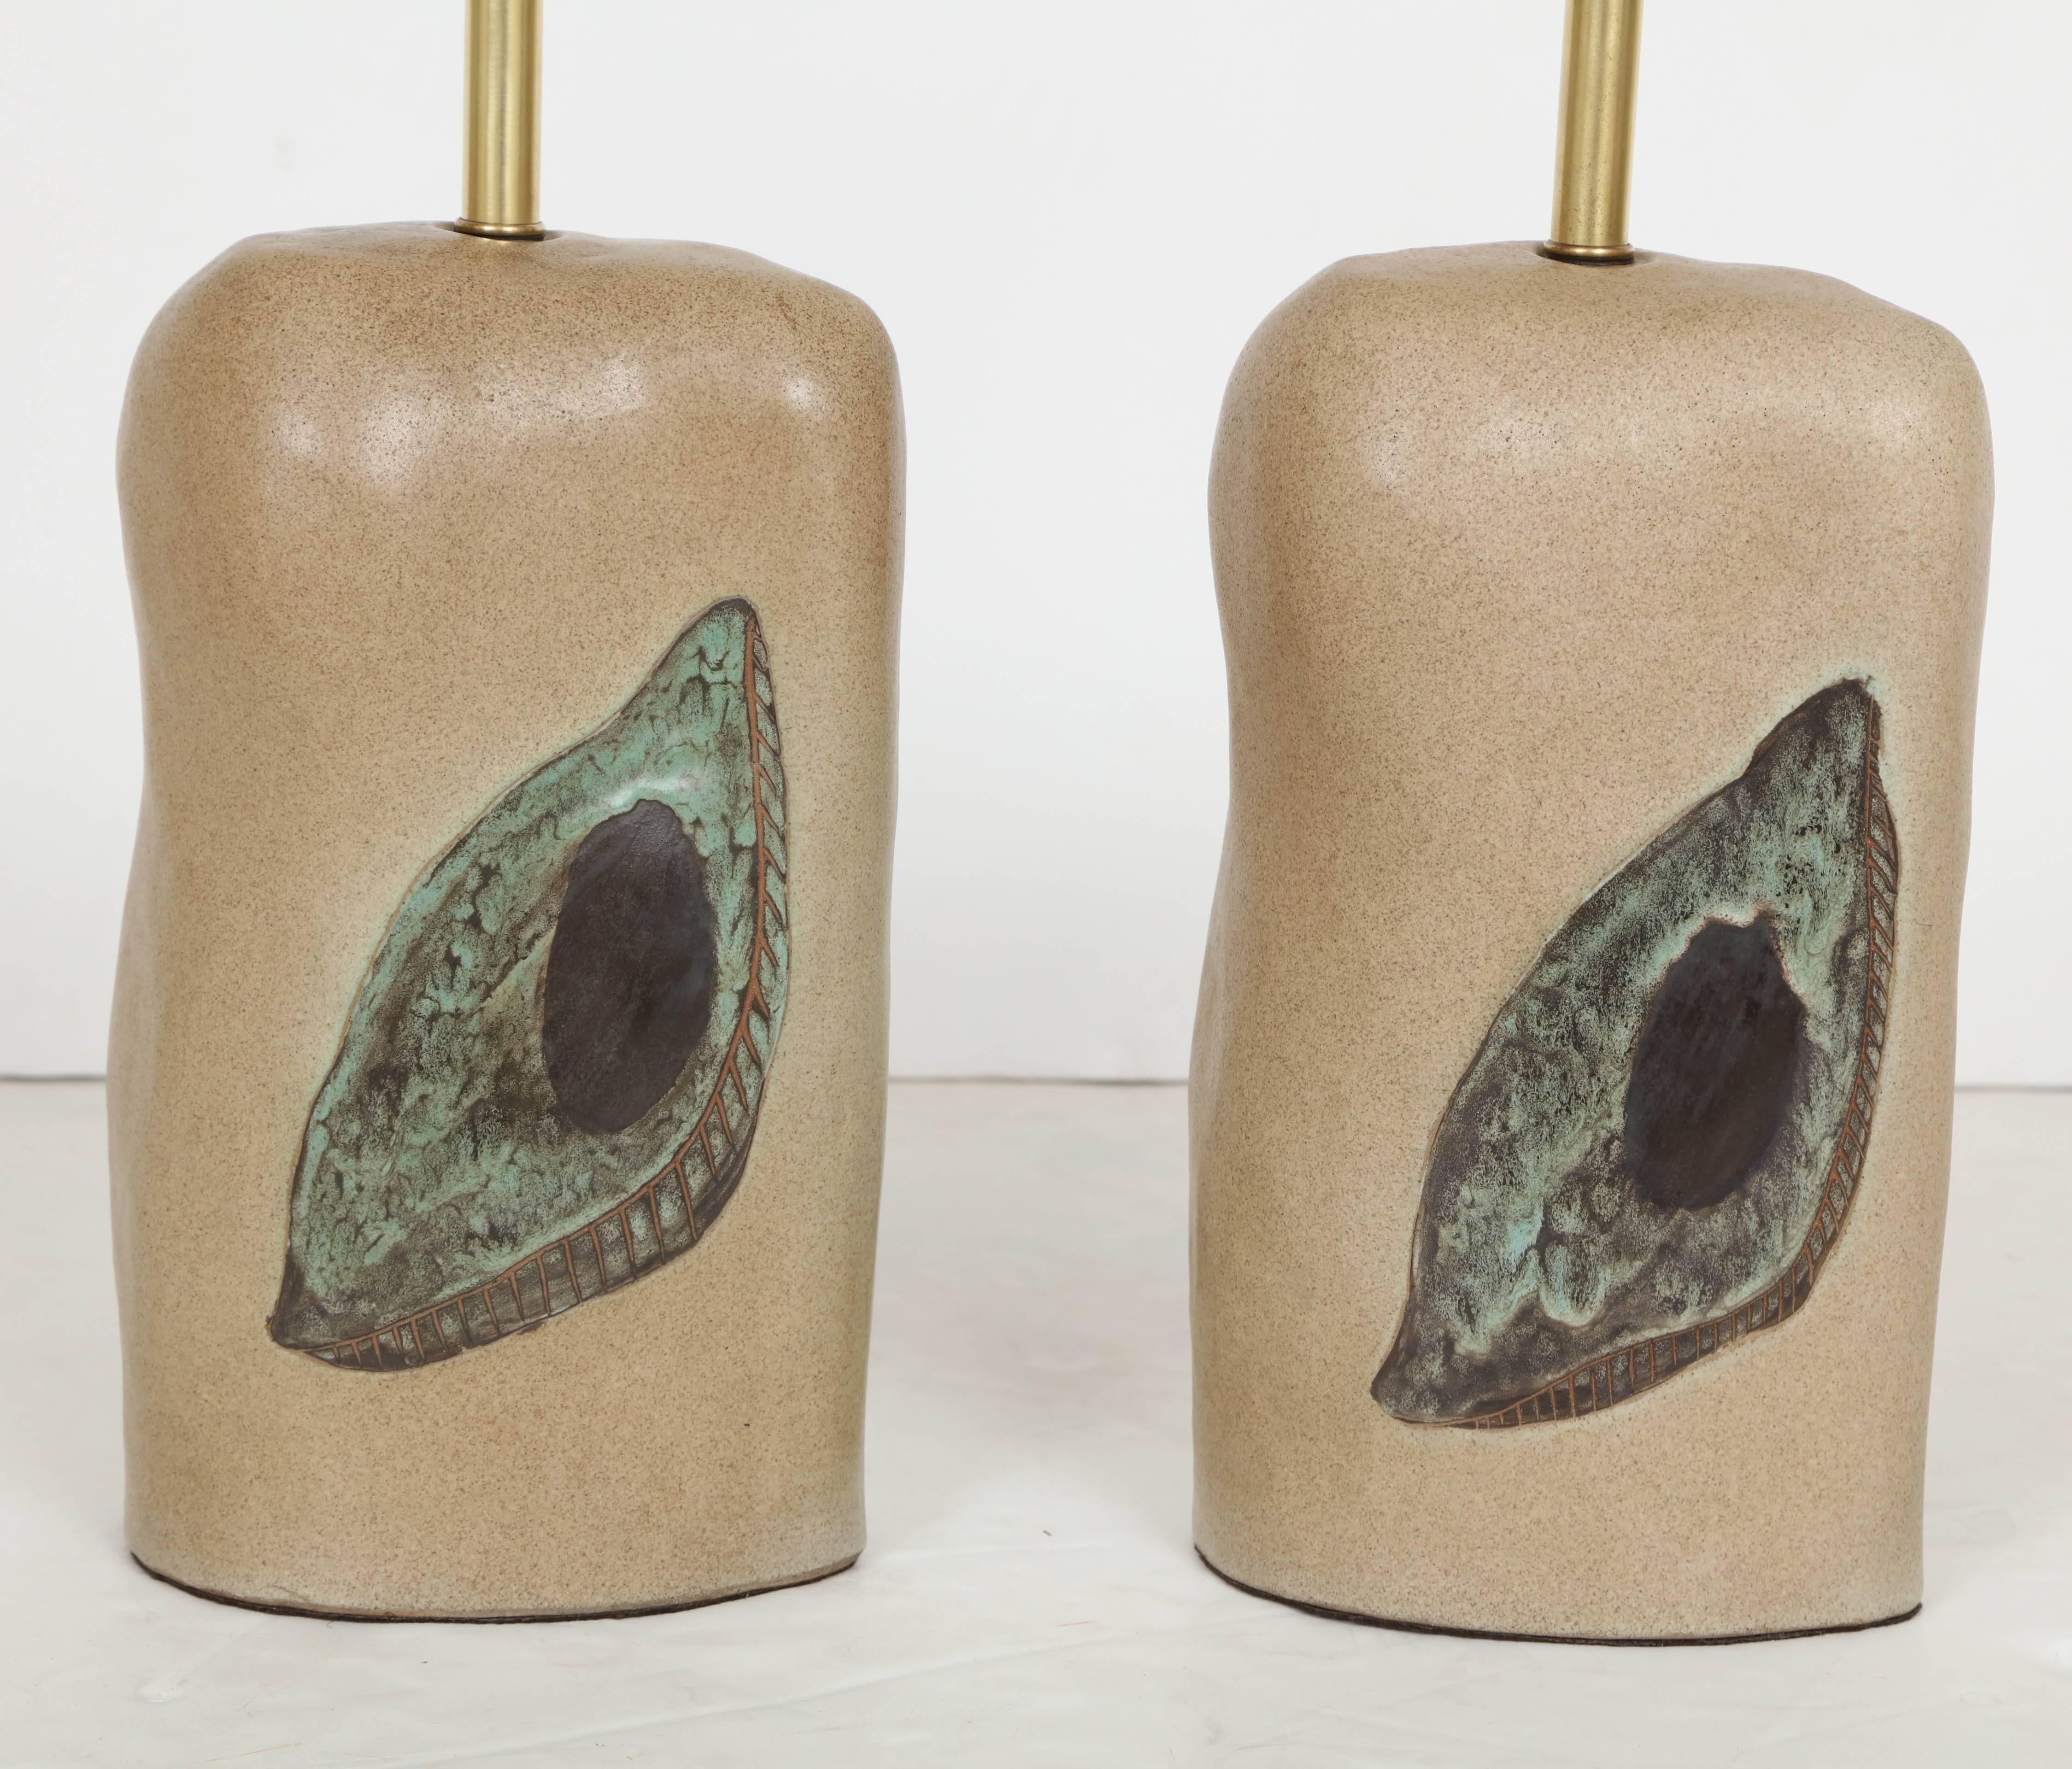 A very fine pair of lamps by New York art ceramicist Marianna von Allesch (Germany/American 1886-1972). Biomorphic redware oval cylinder bases are glazed in a a satin limestone-like glaze and incised and hand-painted with an abstract design in